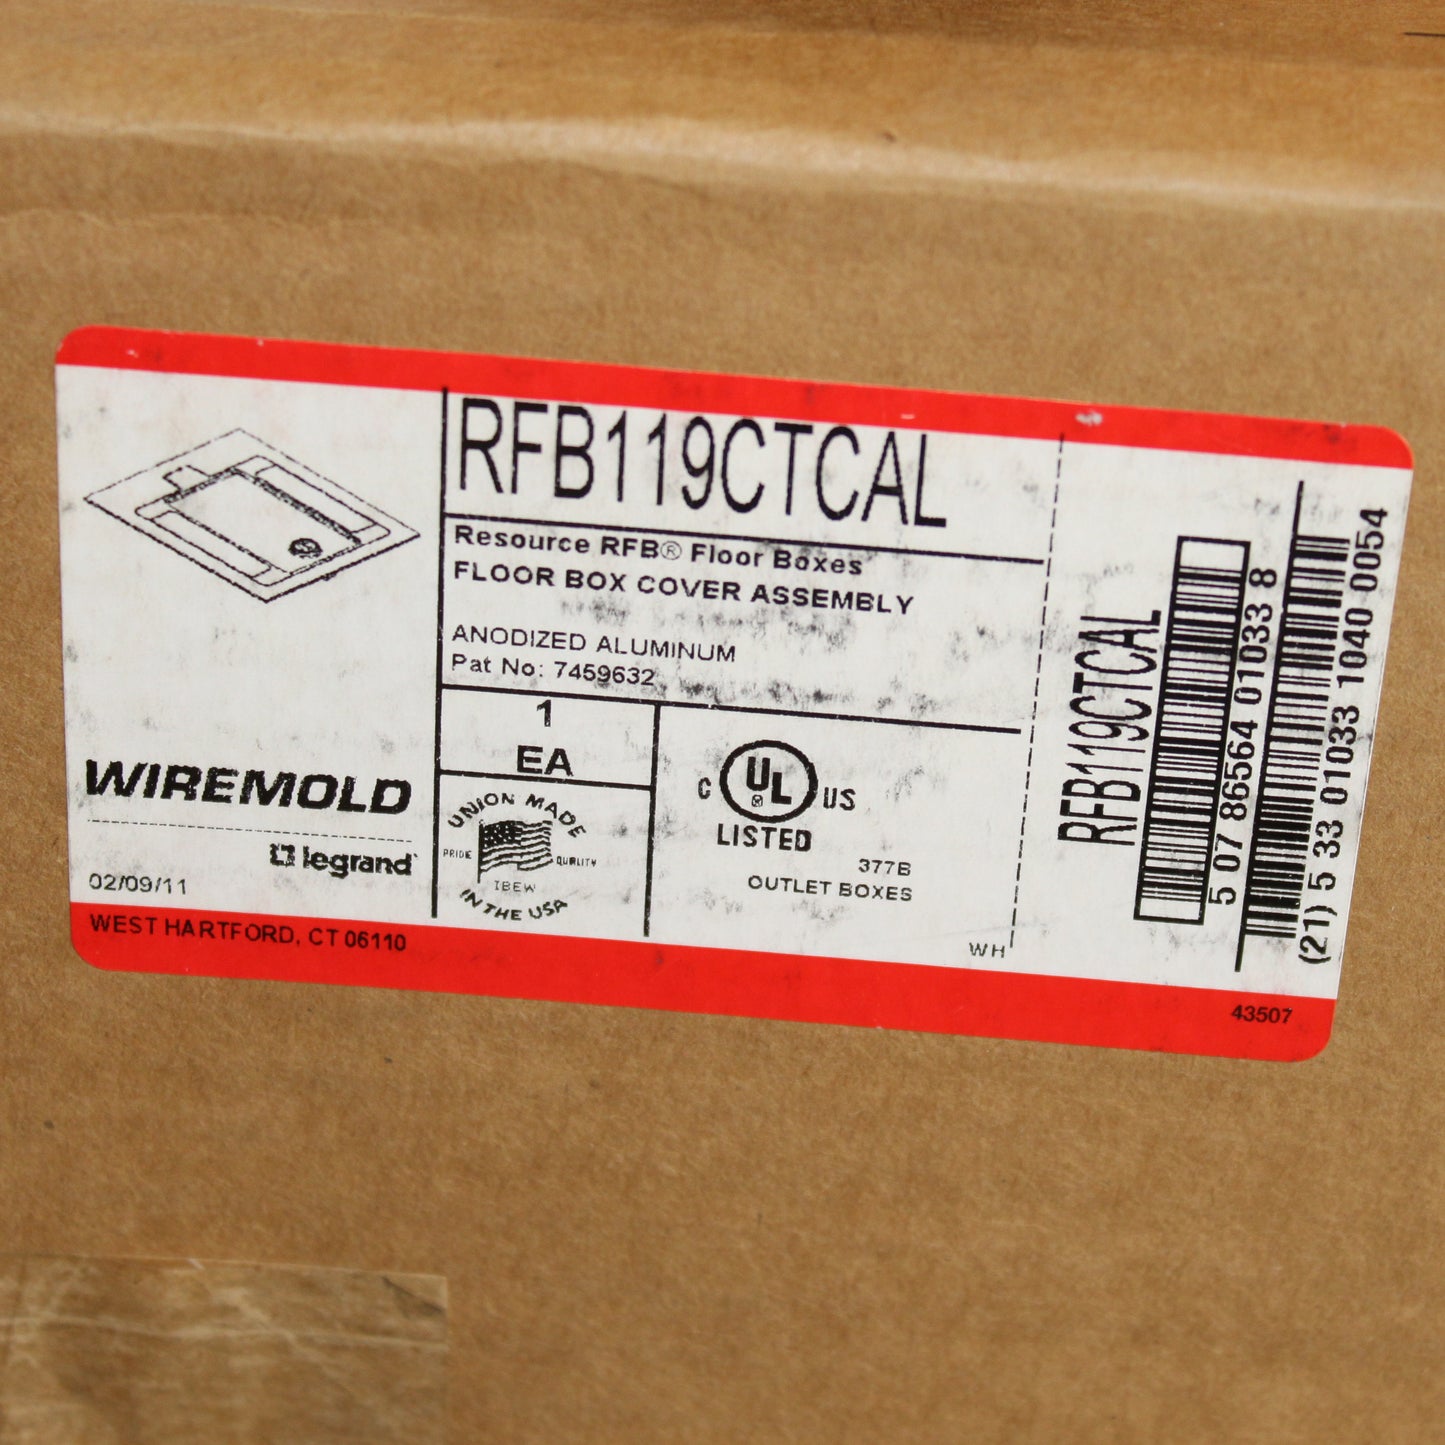 Wiremold RFB119CTCAL